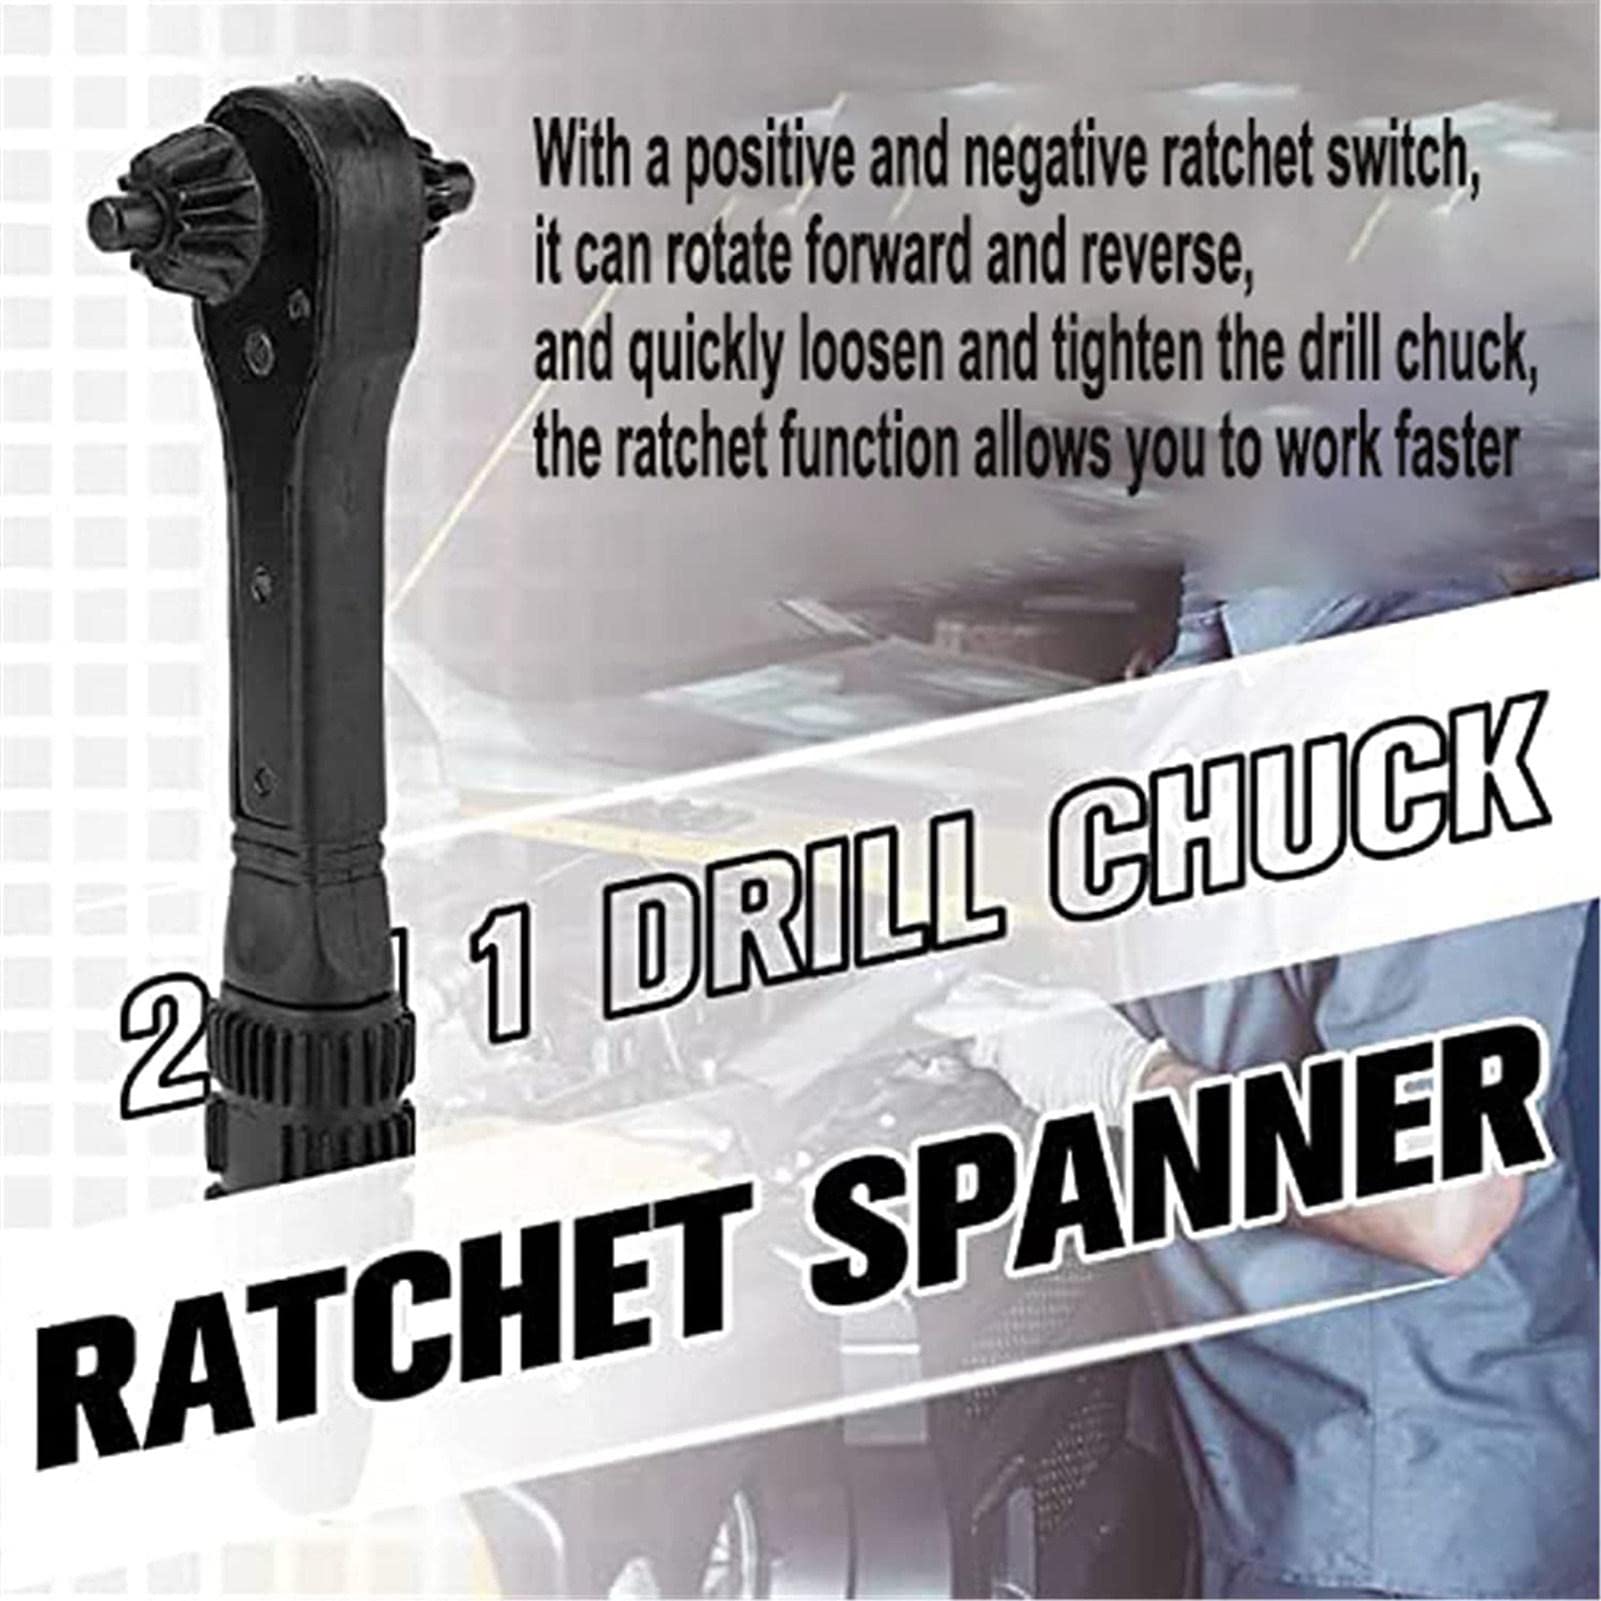 Drill Press Chuck - 2 in 1 Drill Chuck Ratchet Spanner, Dual Use Drill Chuck Wrench Electric Drill Clamp Tool, Multi Universal Power and Hammer Drill Wrench for Electric Tools Gratefulfor